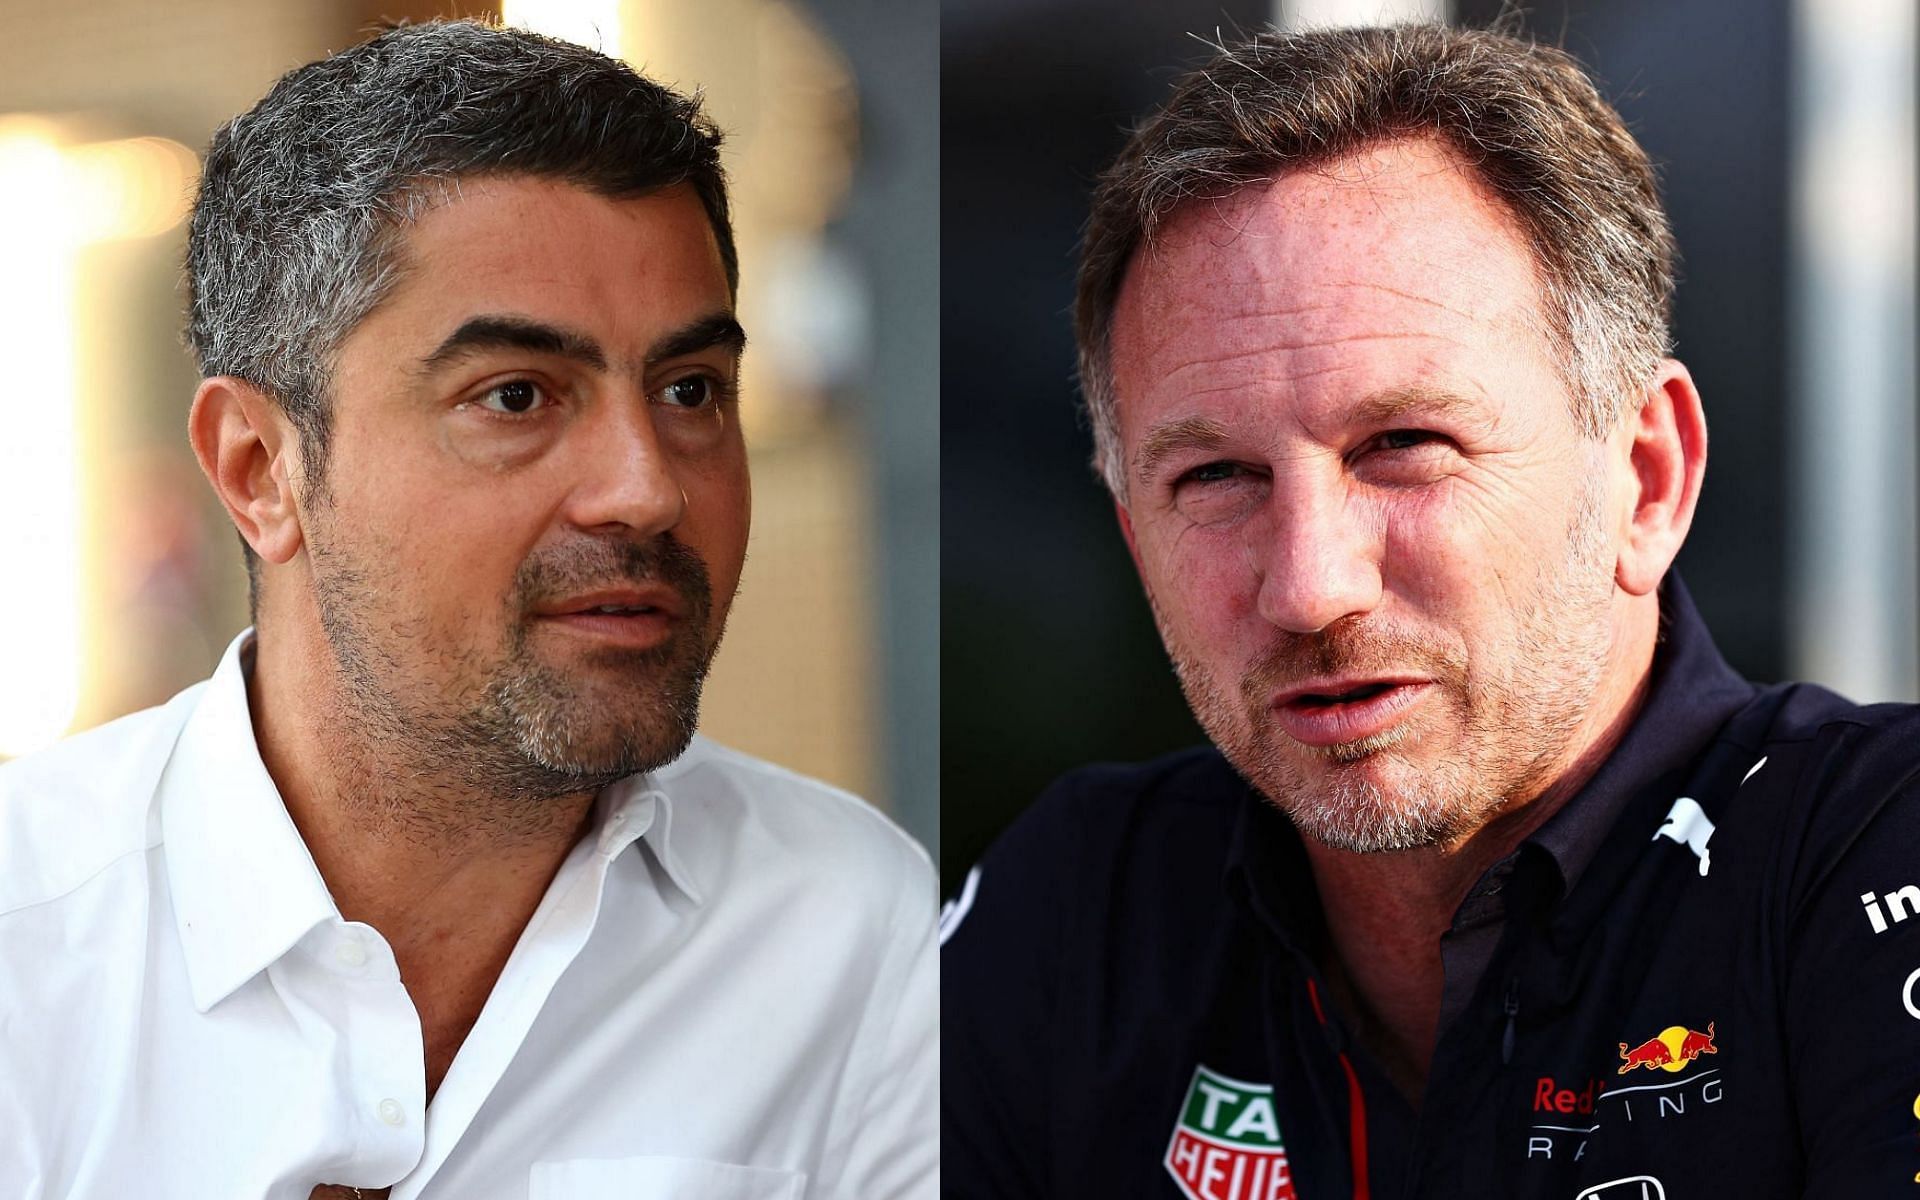 Christian Horner (right) had earlier criticized the FIA for sacking Michael Masi (left) as F1 race director